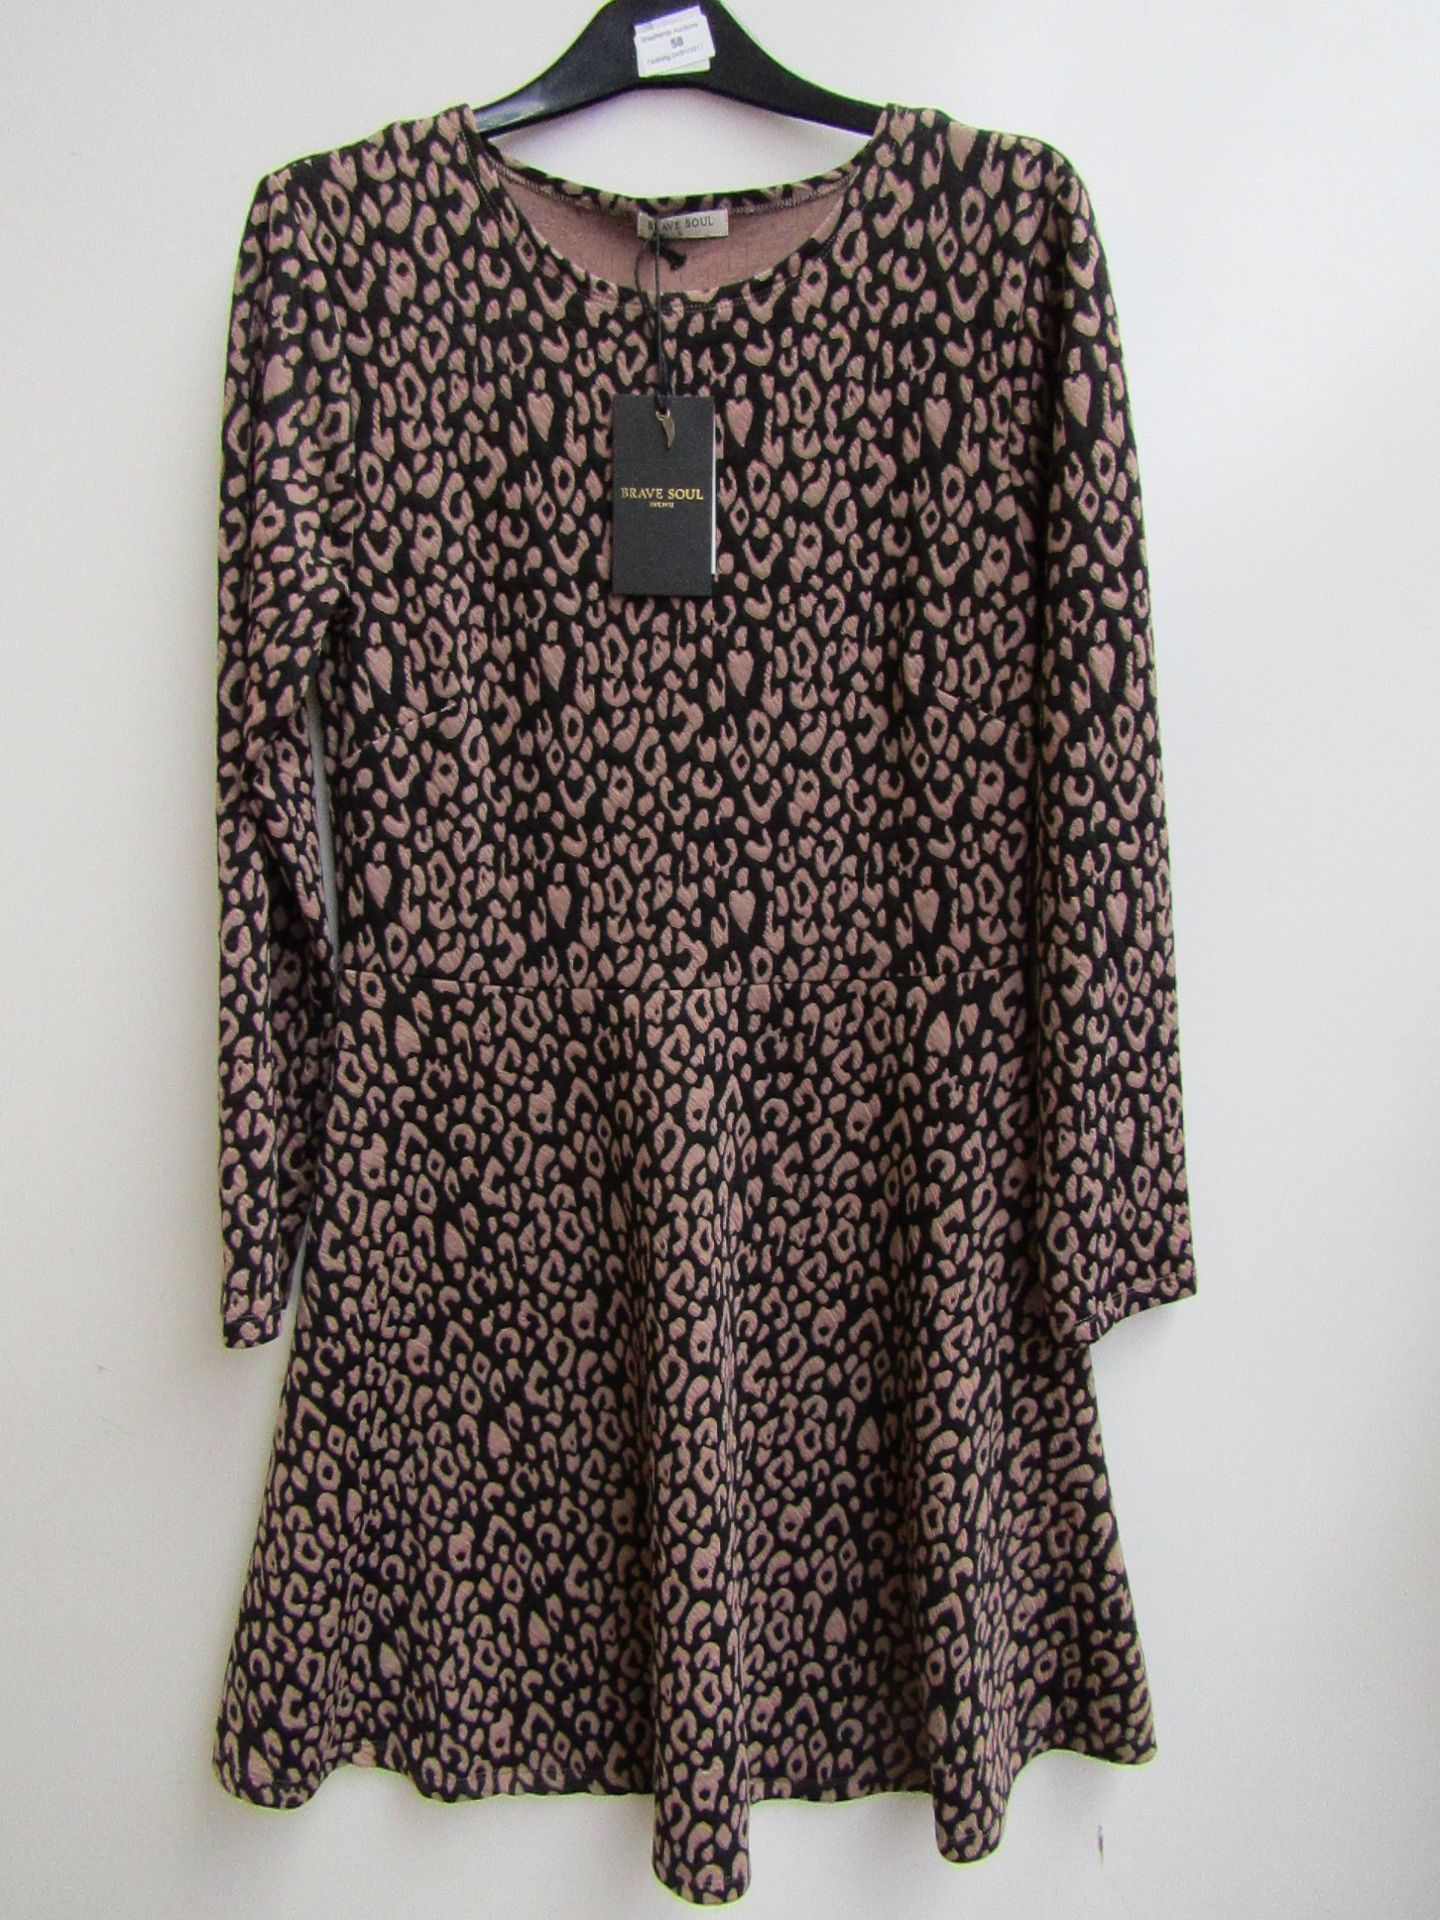 Ladies Brave Soul Long Sleeved dress. Size L. New with Tags